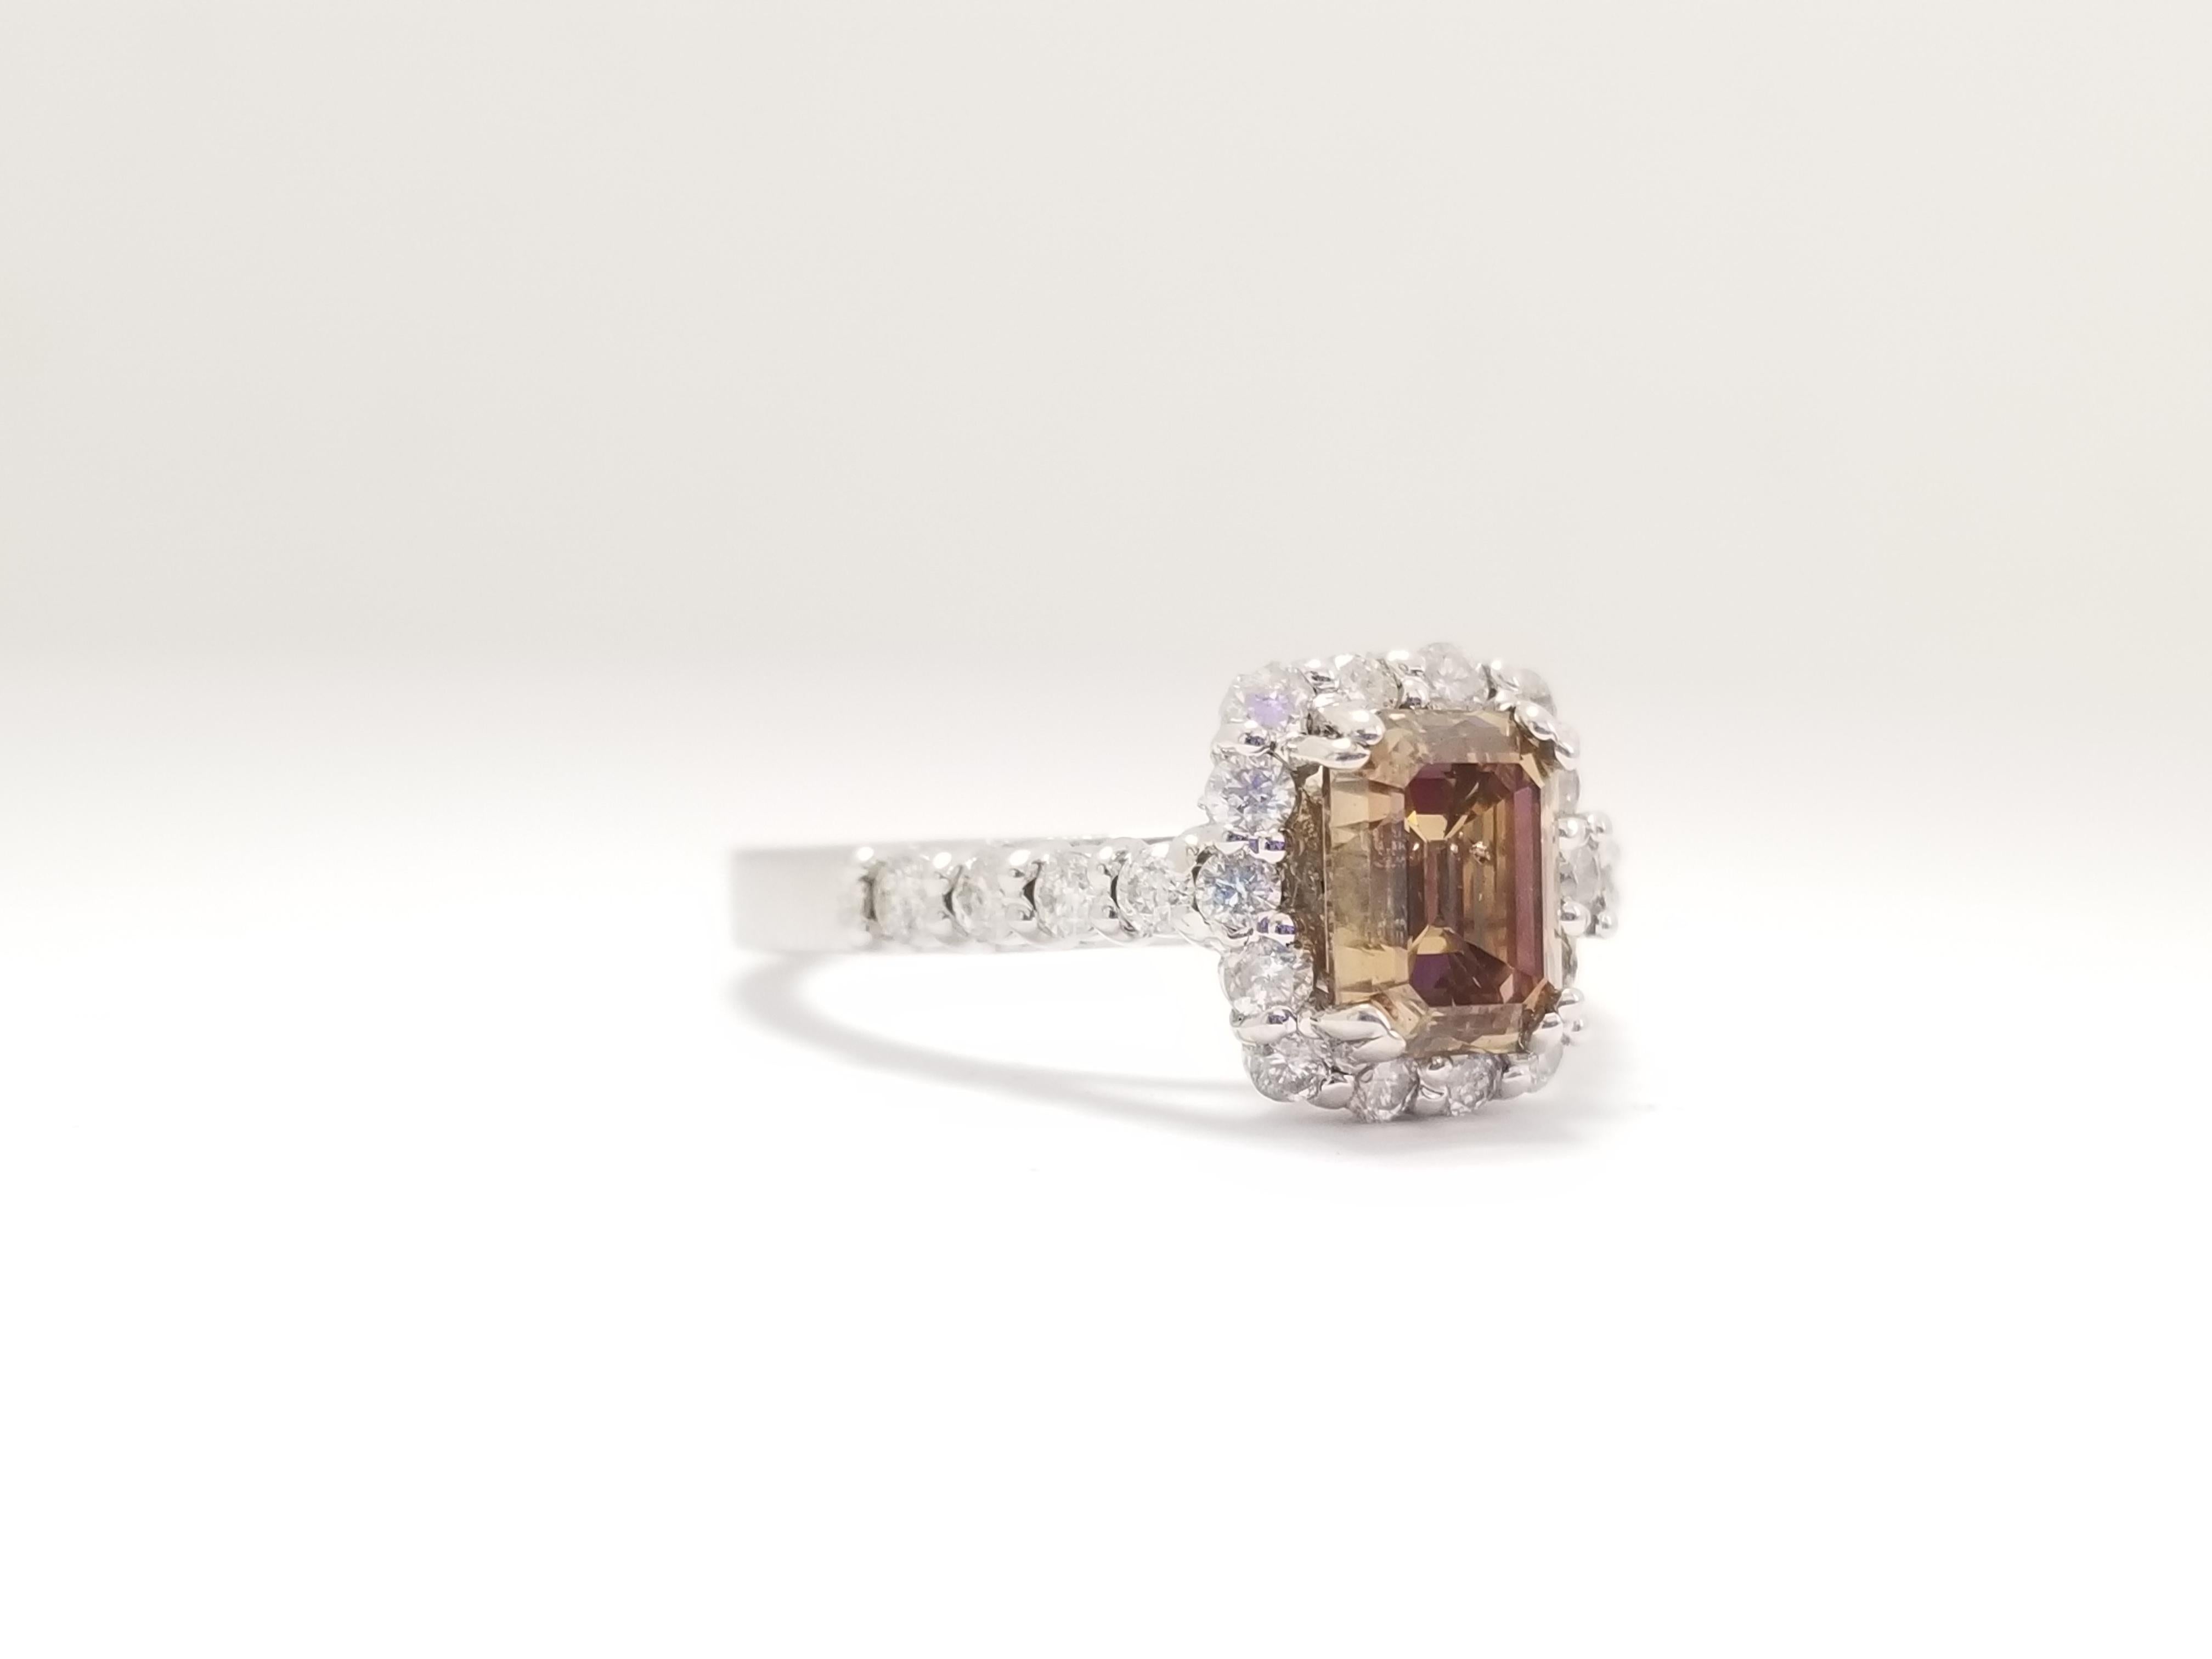 All Natural Fancy Yellow-Brown Emerald Cut Diamond Ring Weighing 1.33 carats by GIA. Elegance for every occasion.
Ring Size: 6.5